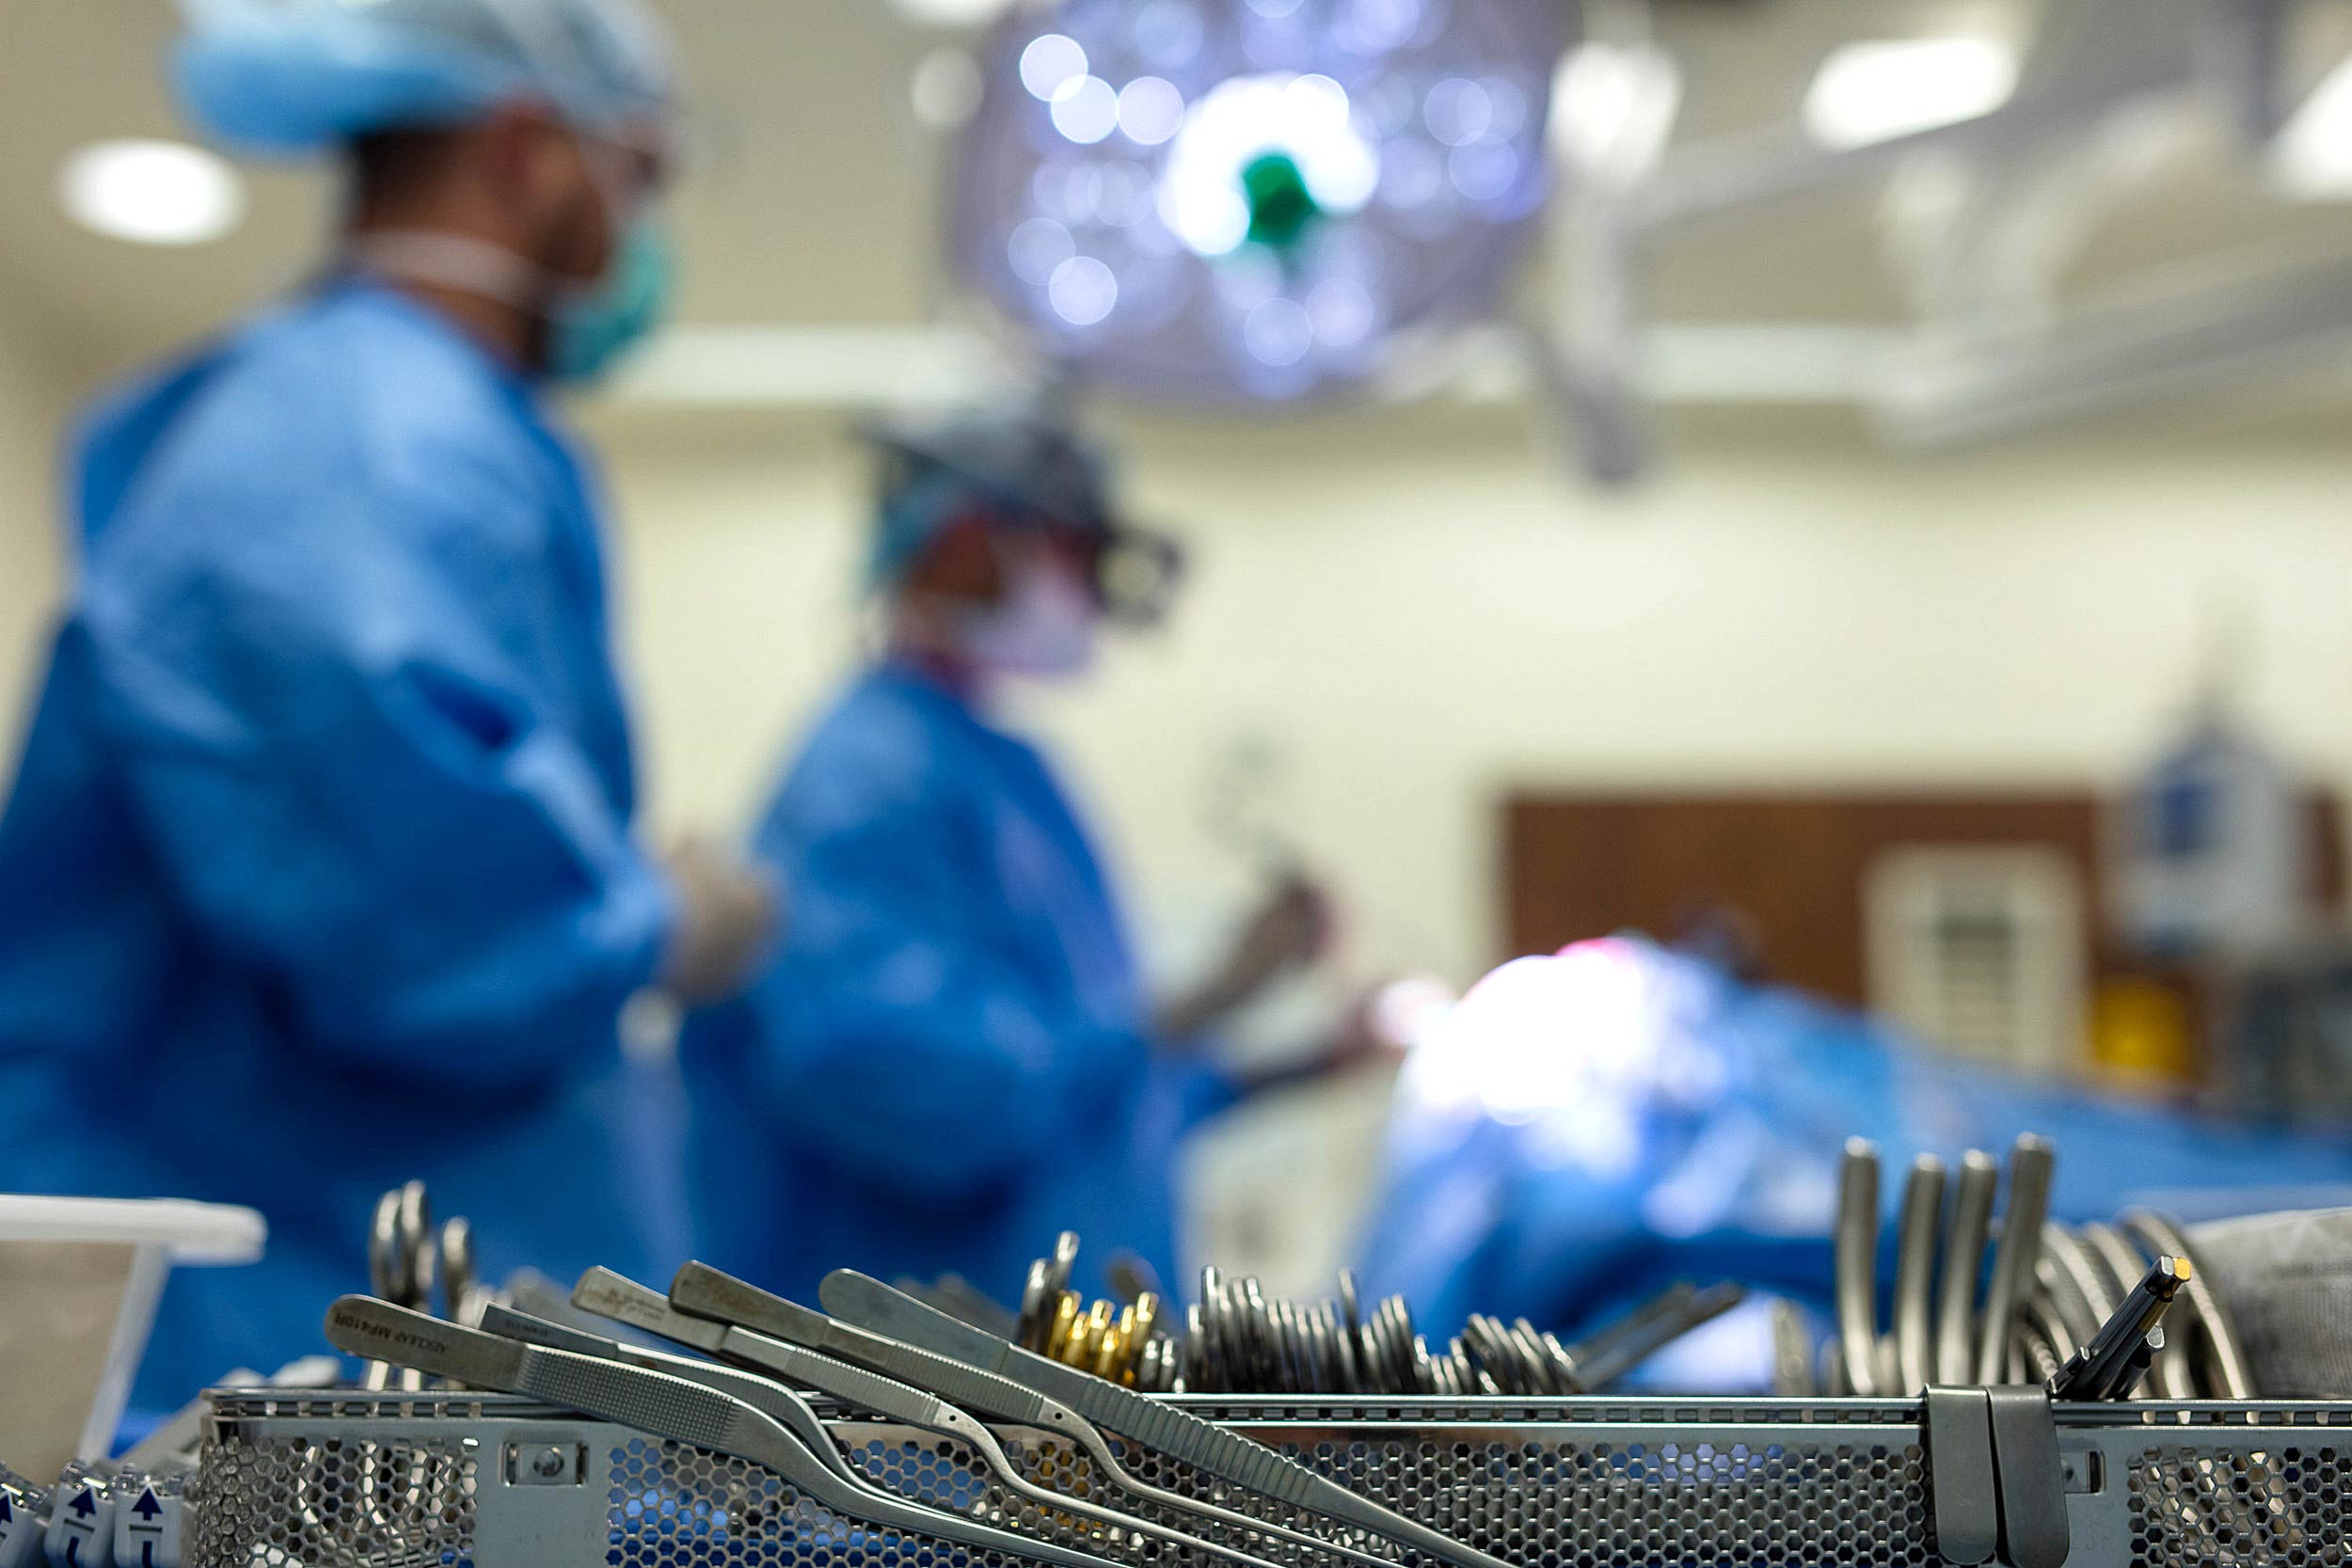 Neurosurgery Instruments in Operating Room